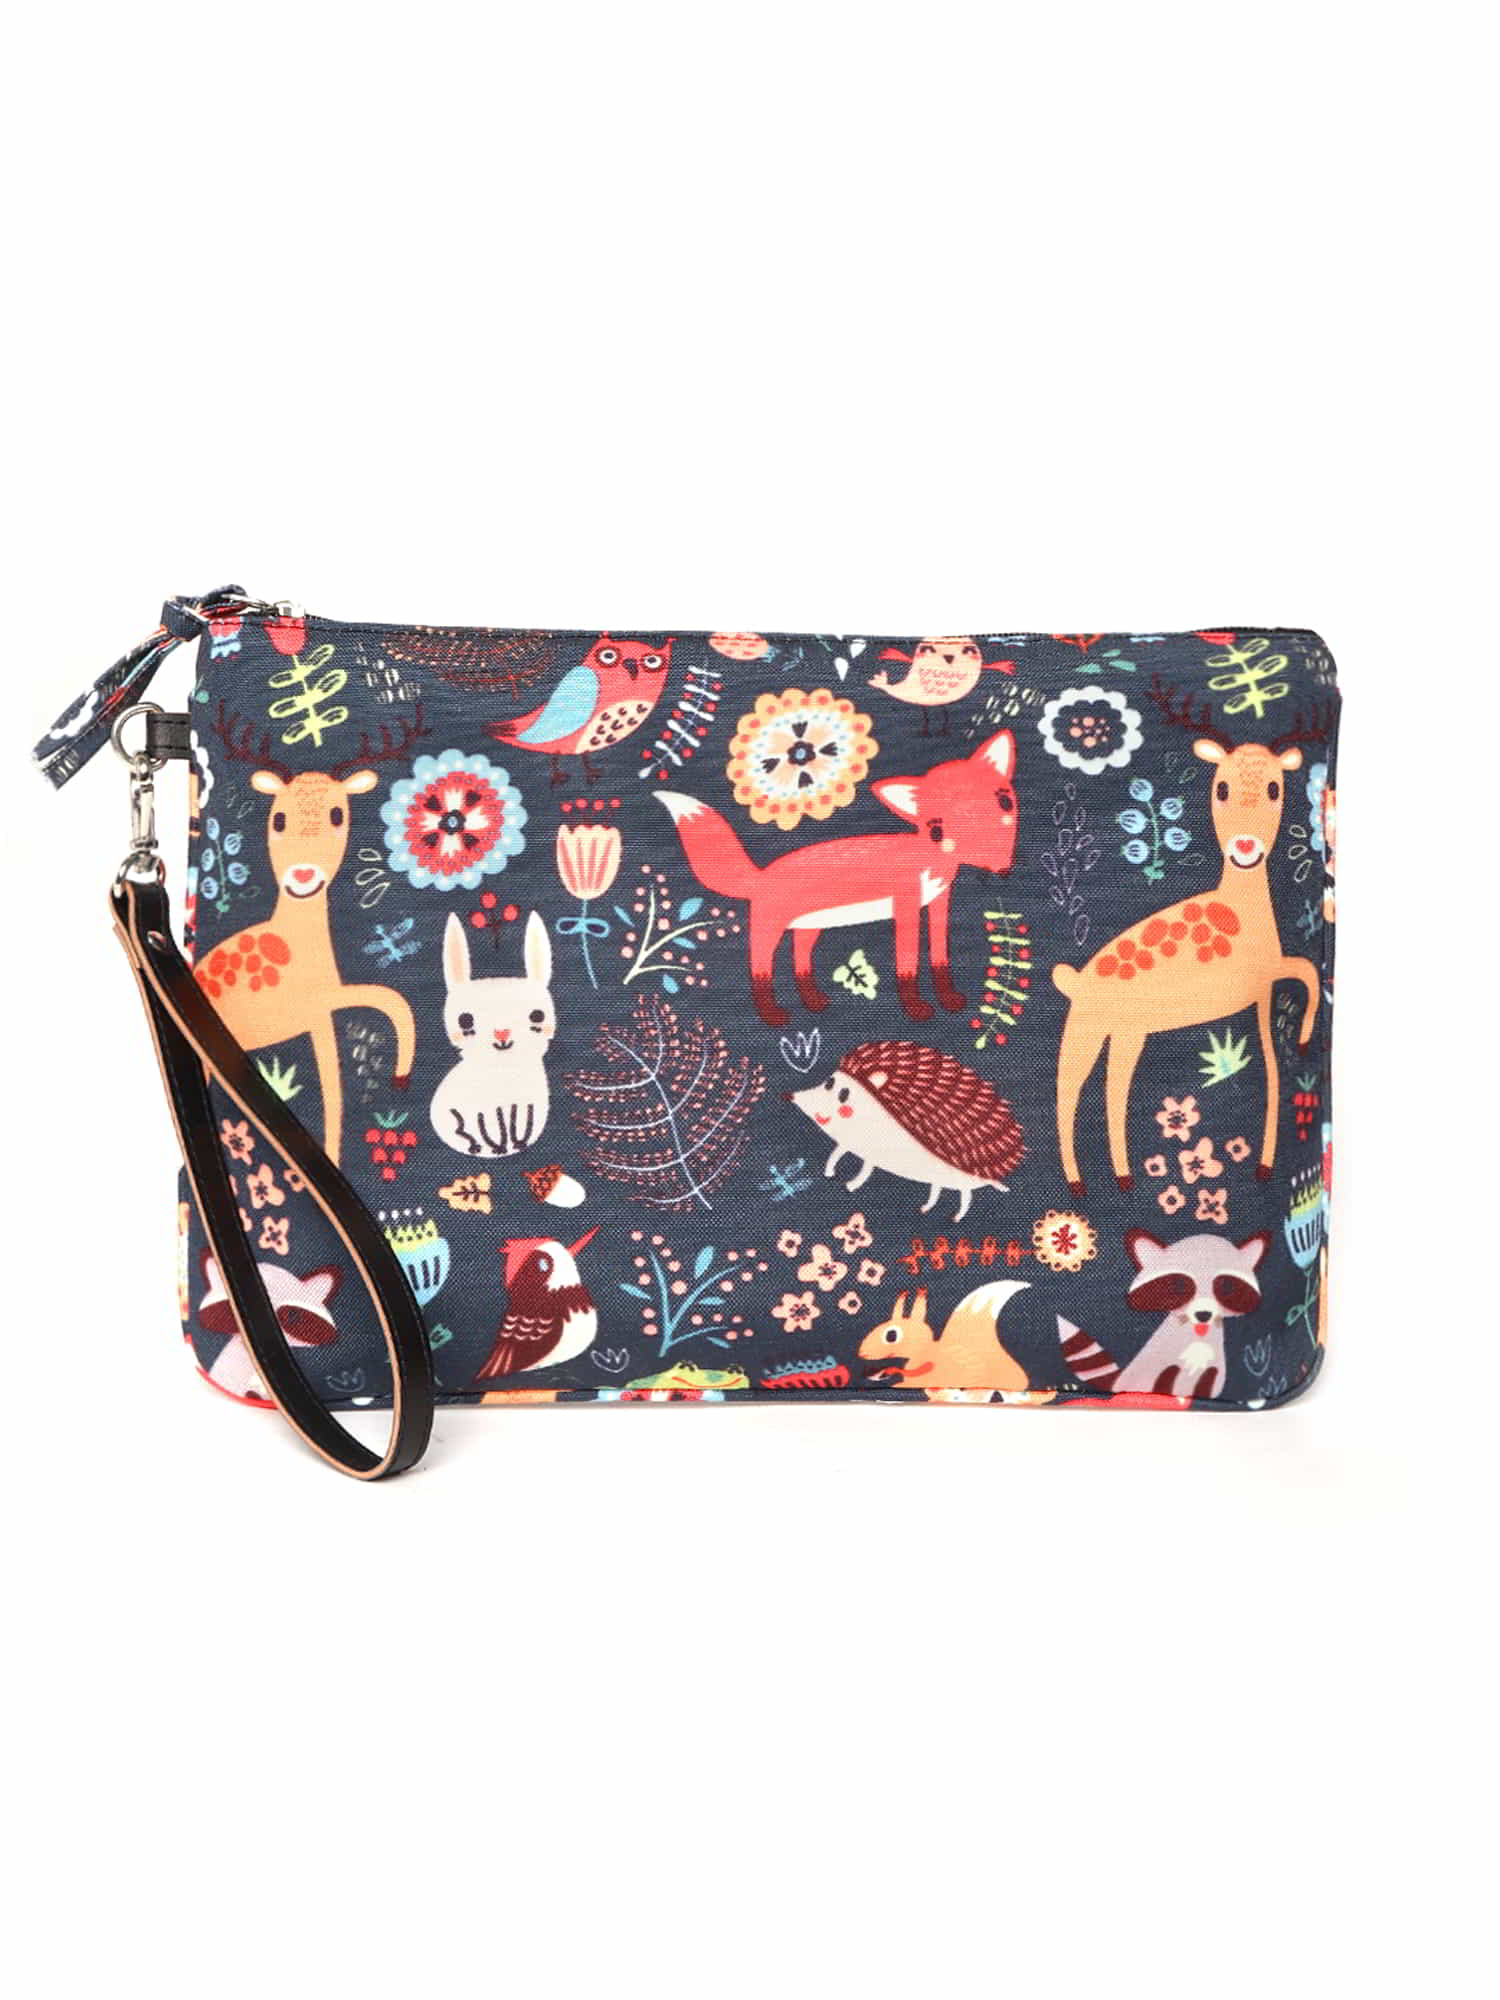 Modish Polyester Quirky Cosmetic Vanity Bag